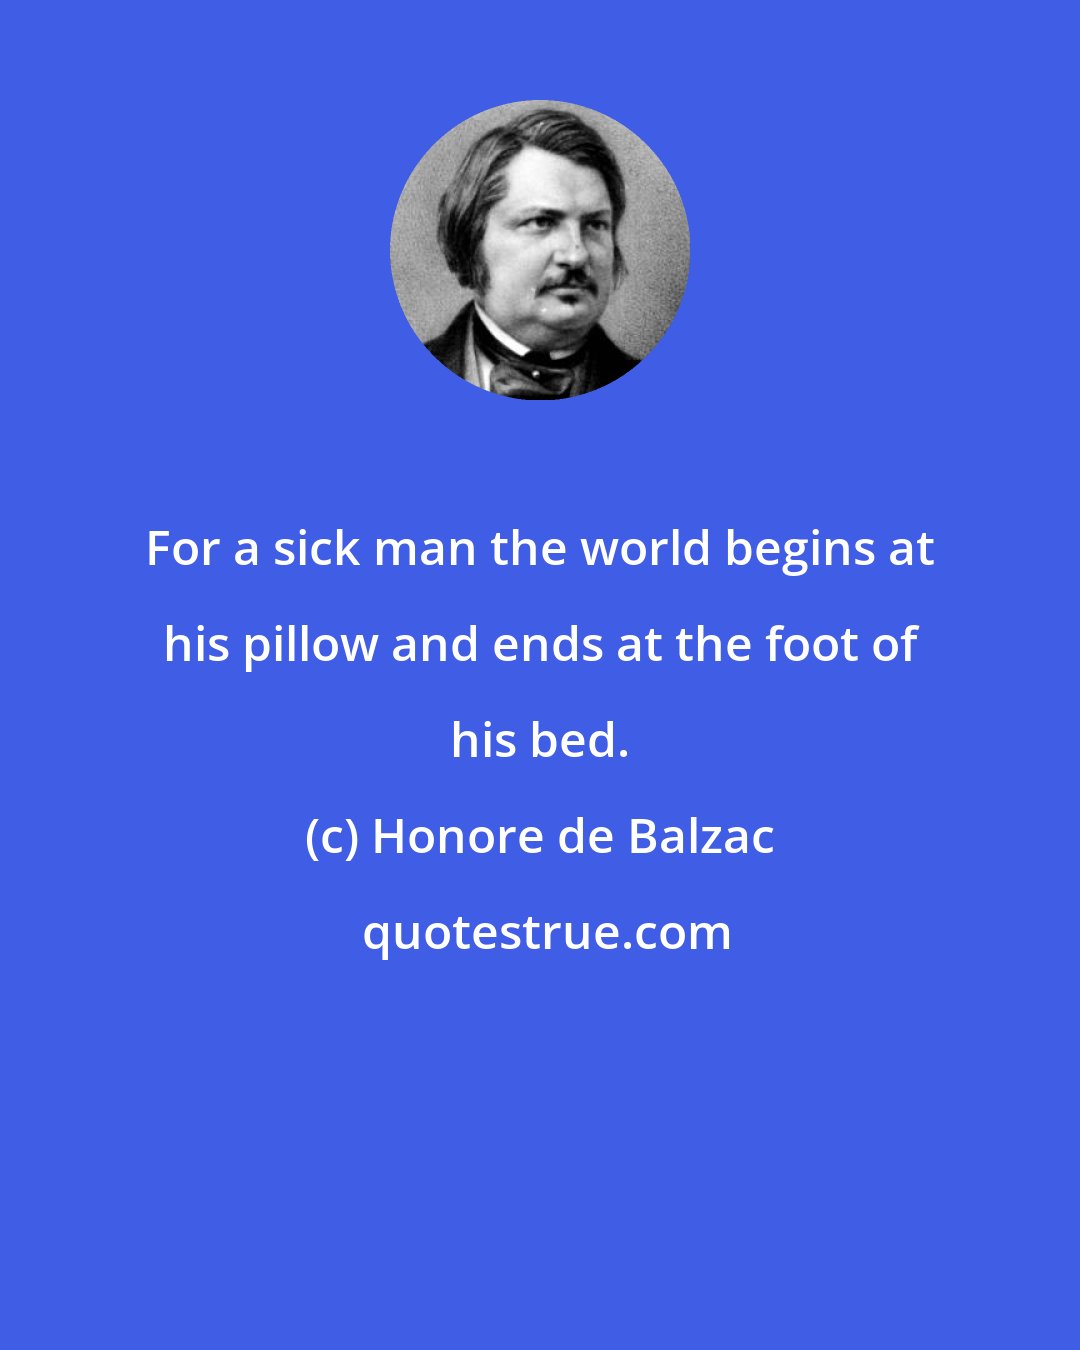 Honore de Balzac: For a sick man the world begins at his pillow and ends at the foot of his bed.